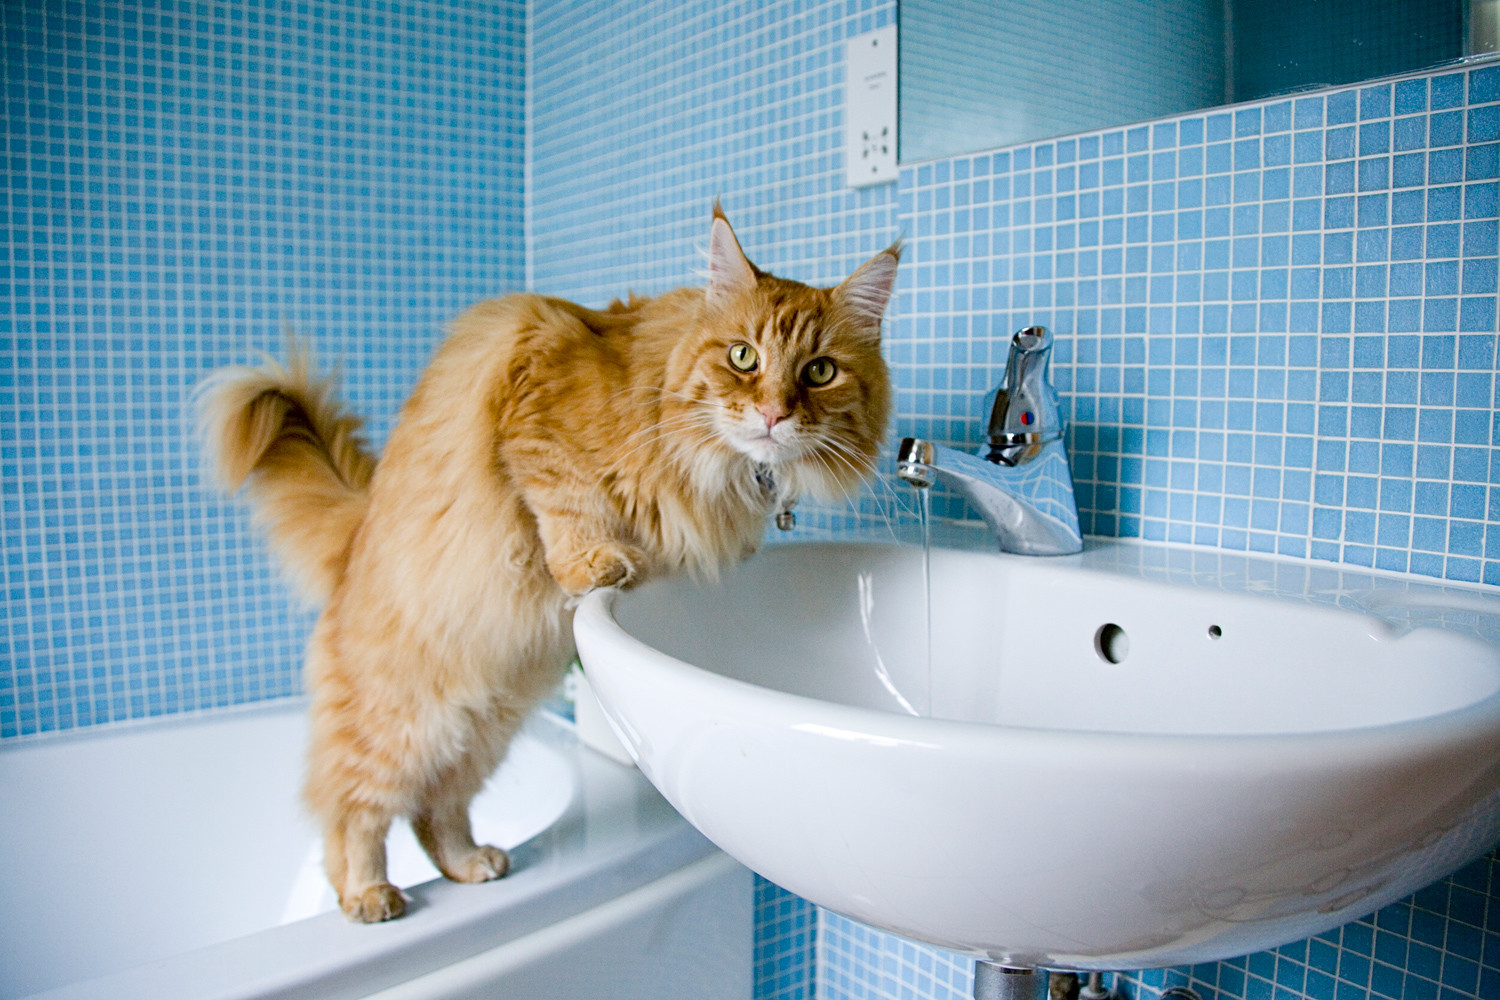 A third-most popular is Main Coon. The average price for such cats on Avito is $301.